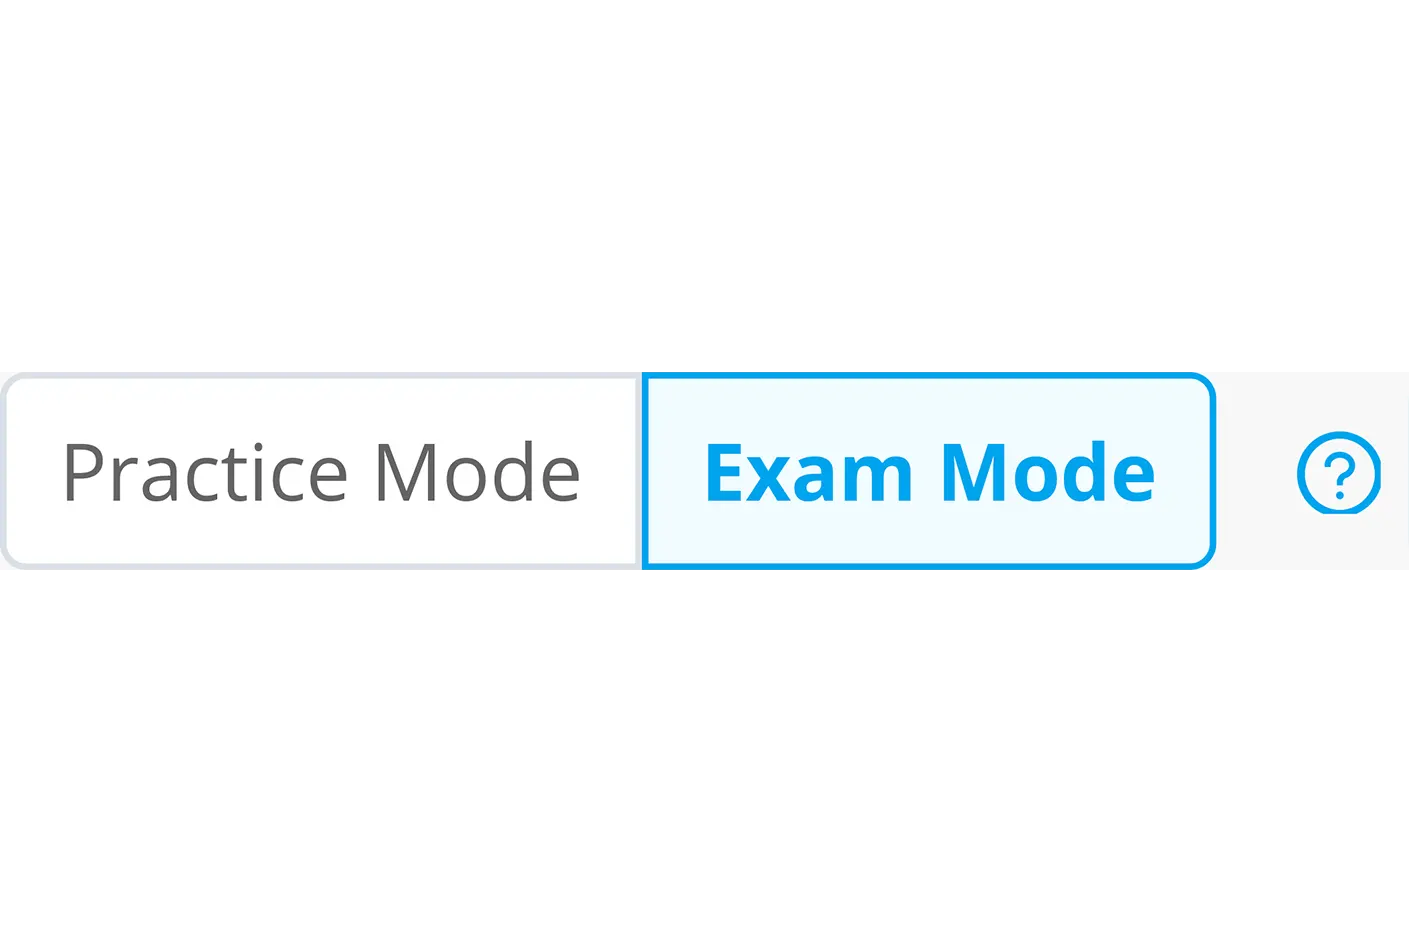 There is a screenshot of exam mode select for Aptitude Test pract